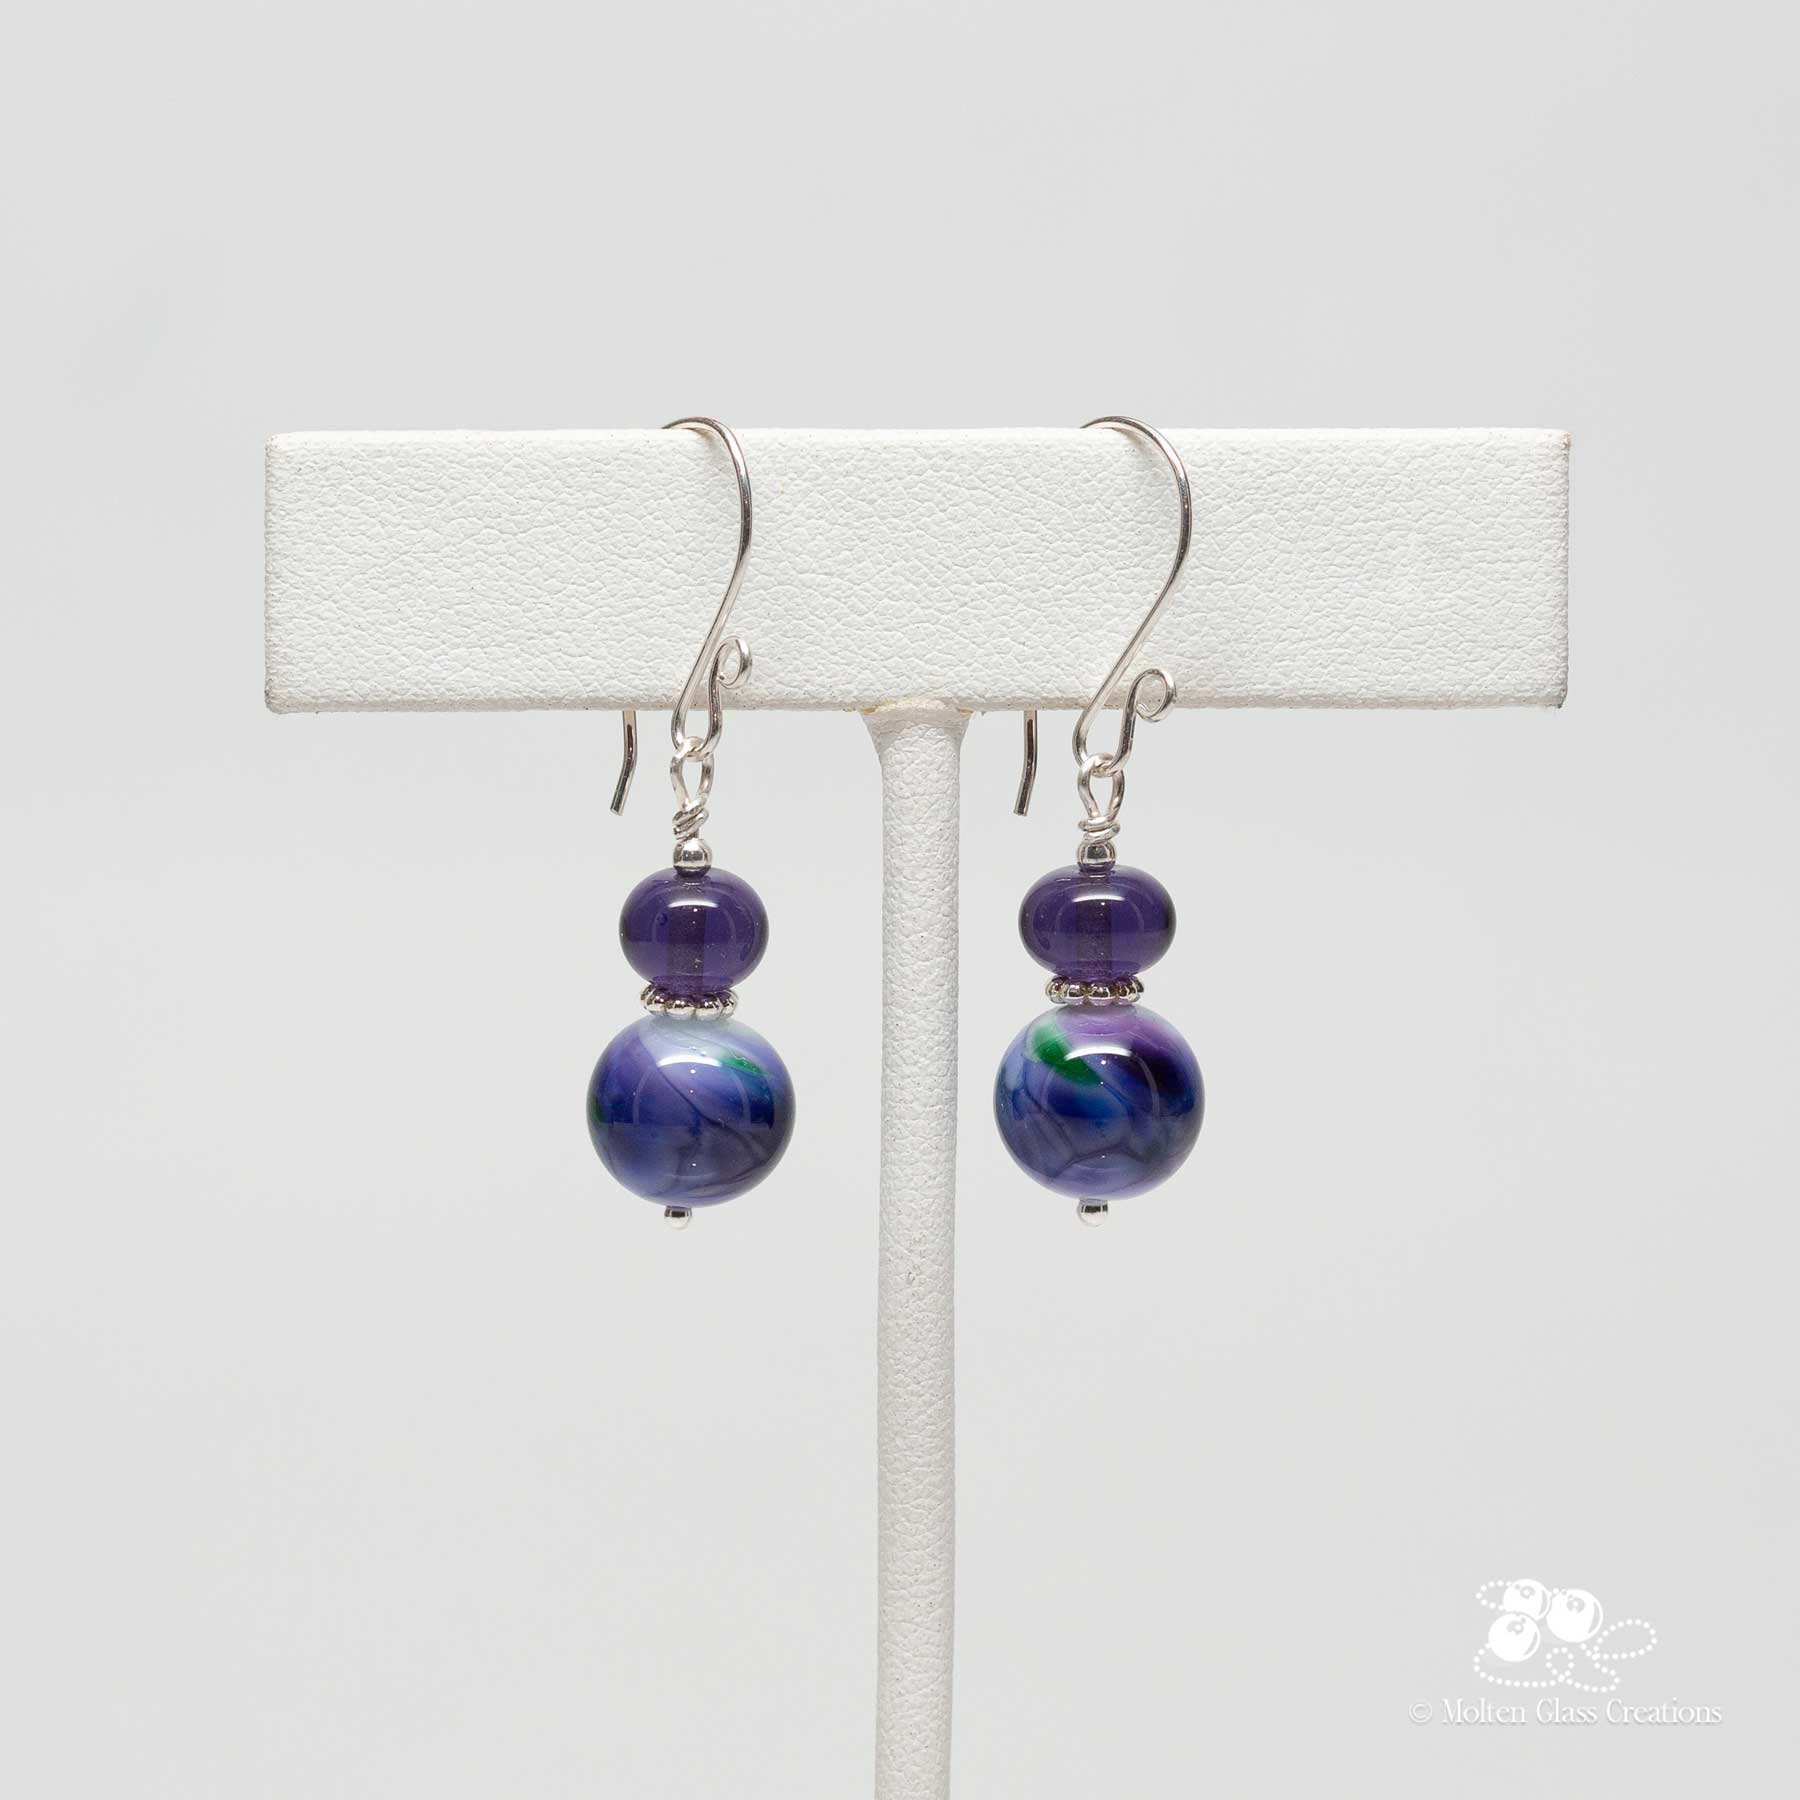 earrings with a purple marble style look